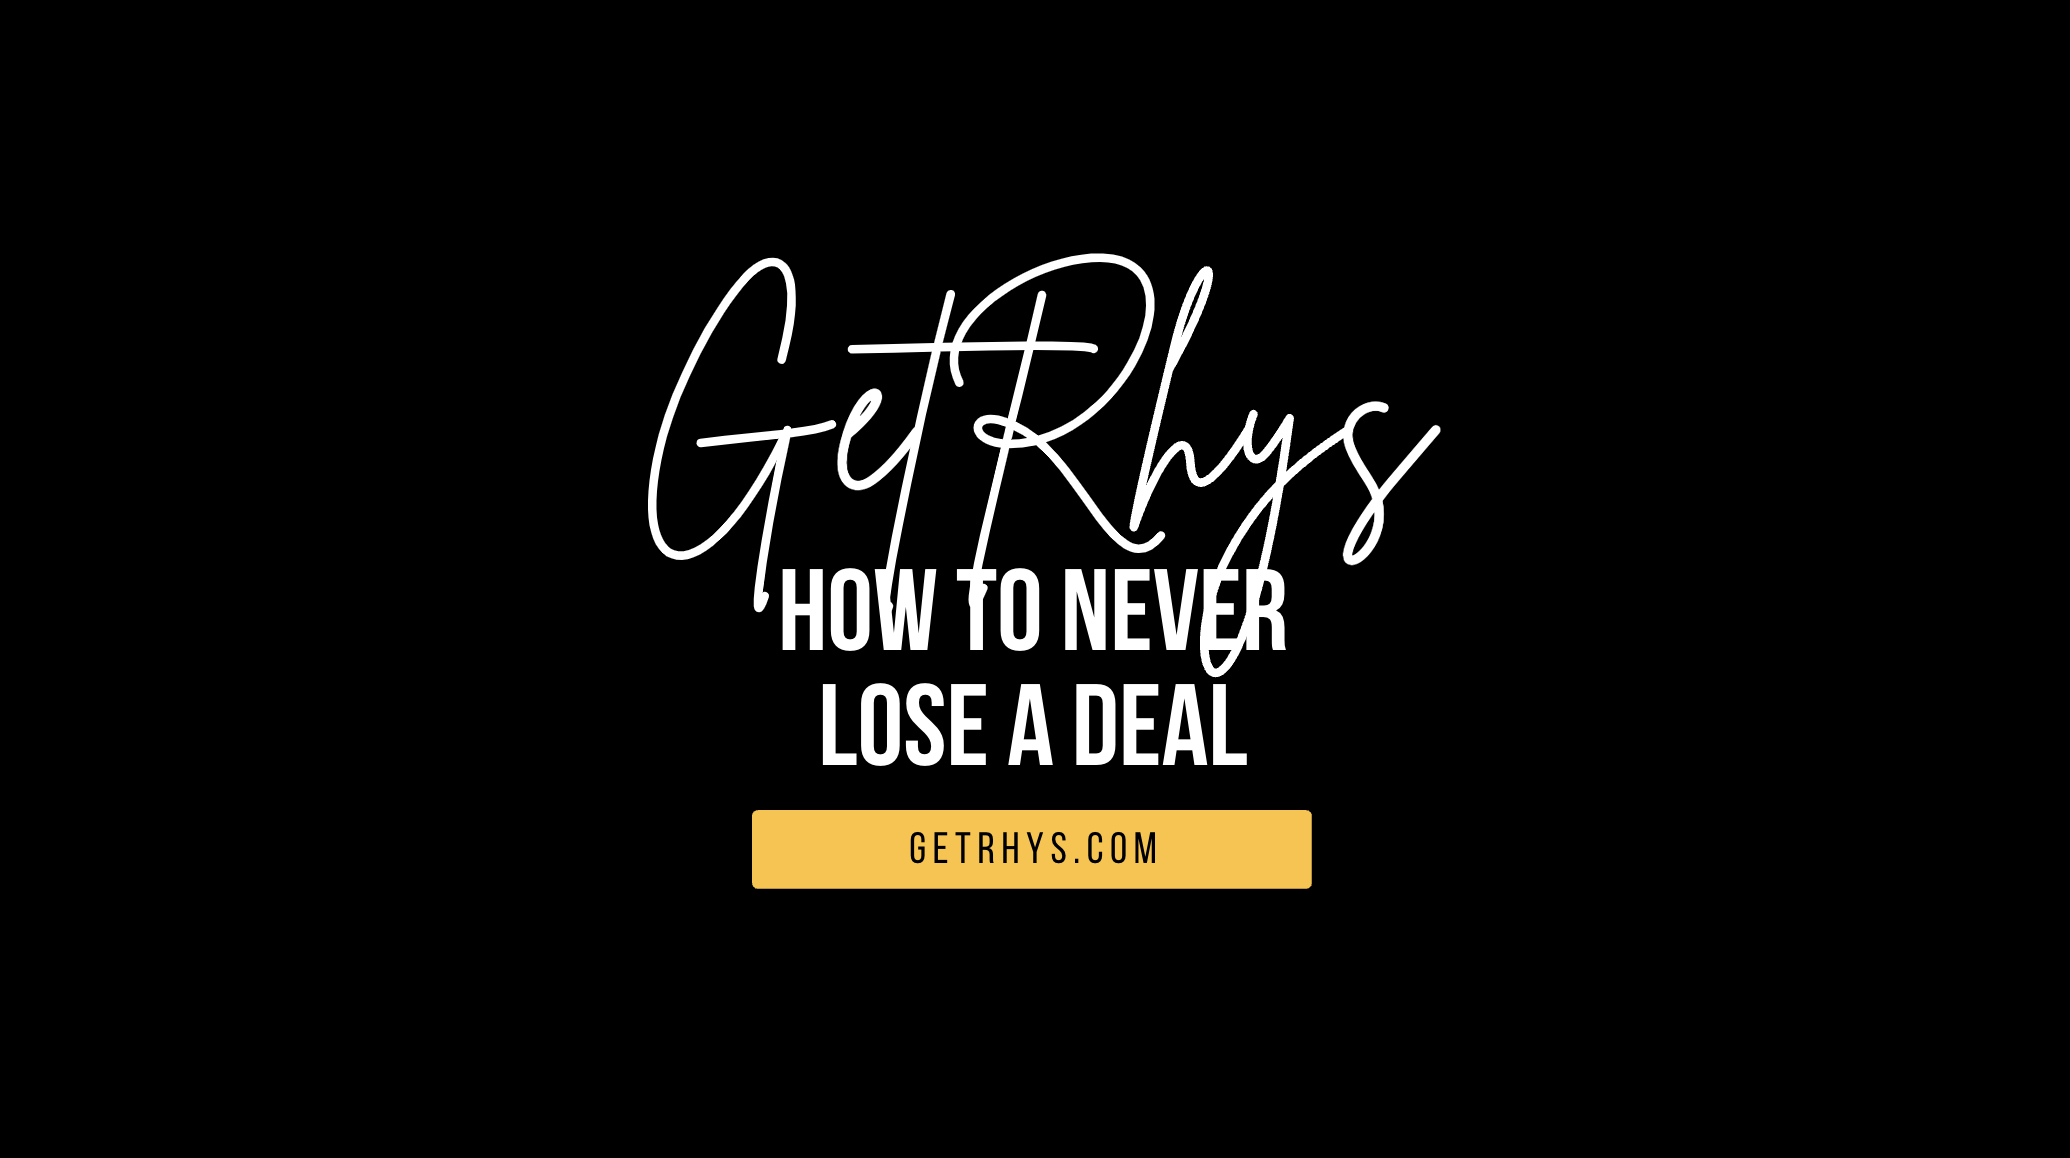 How to never lose a deal